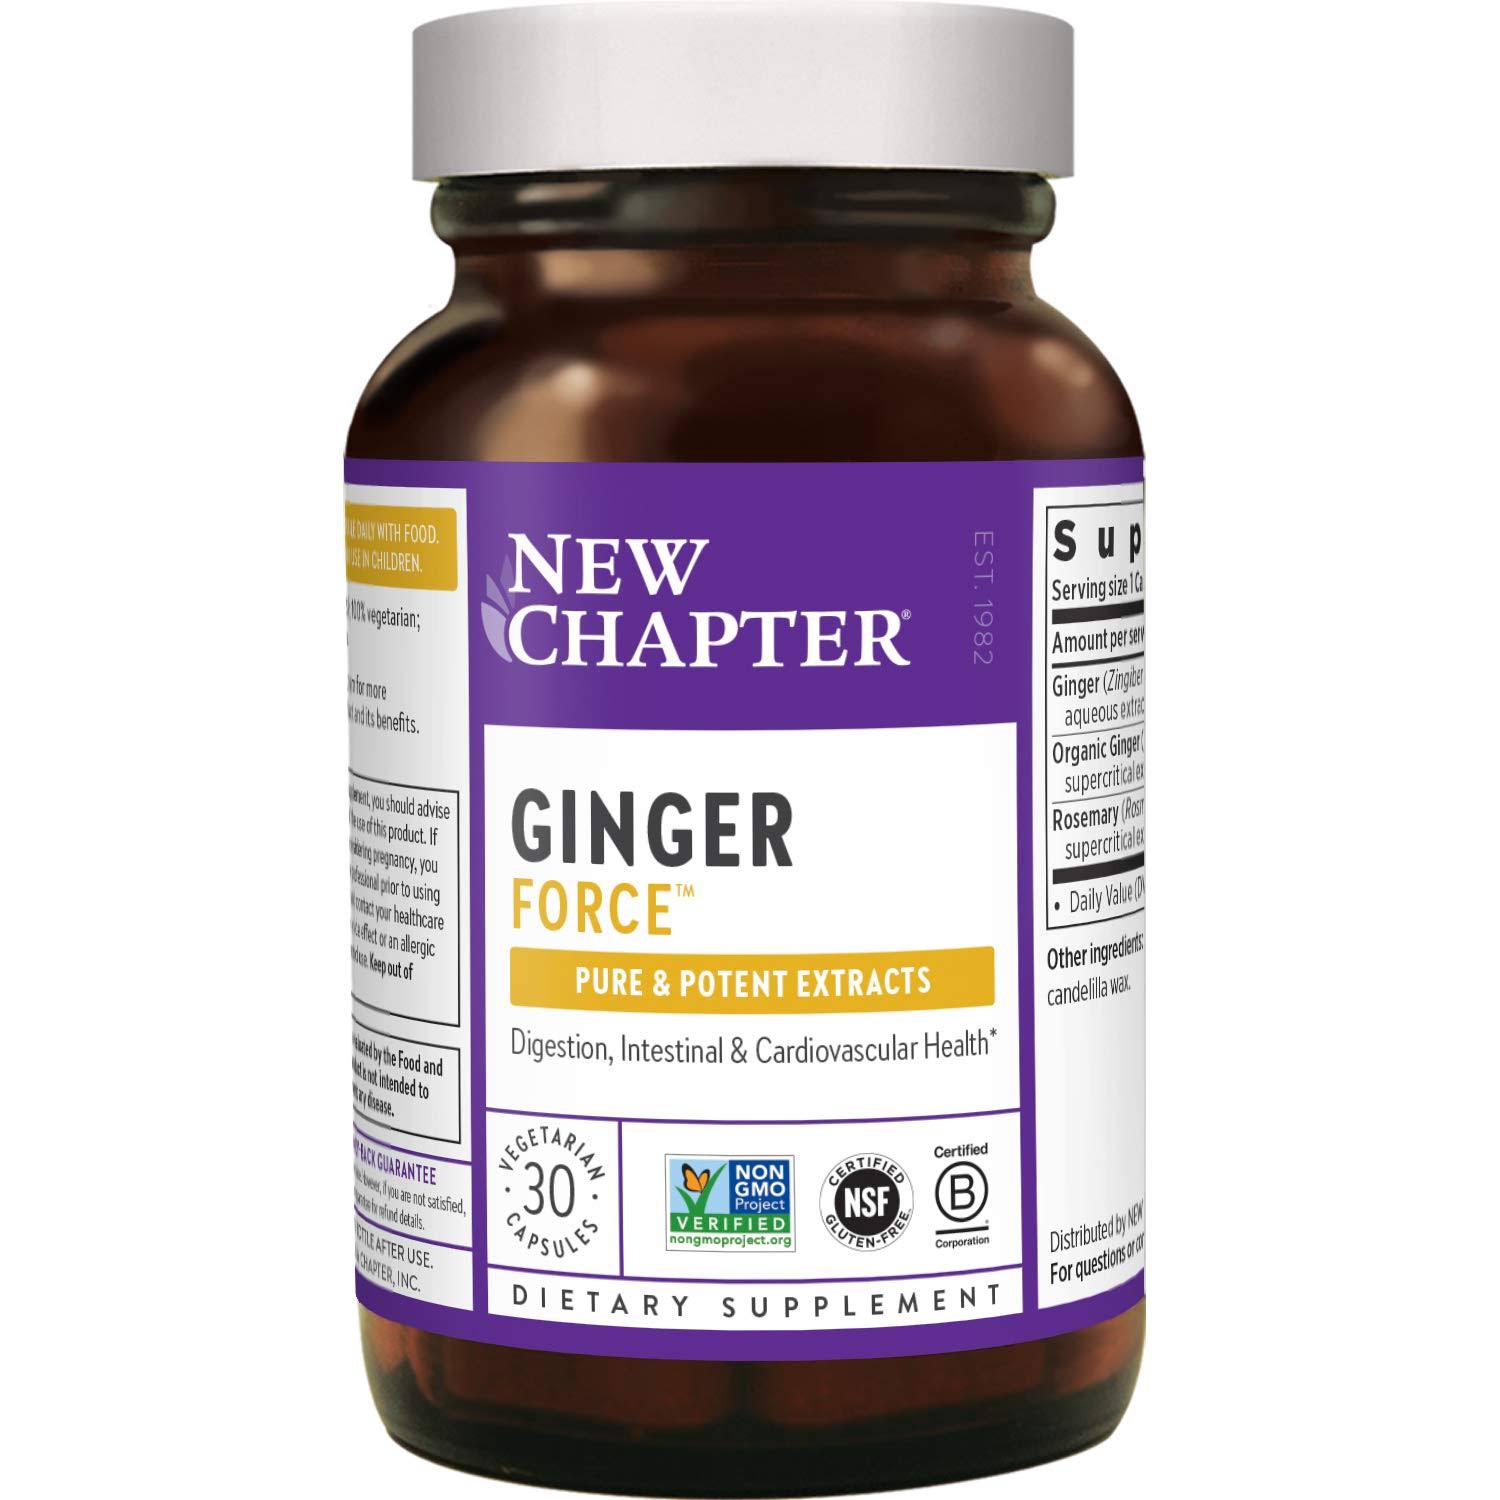 New Chapter Ginger Force Vegetarian Capsules - 30 Liquid Vcaps